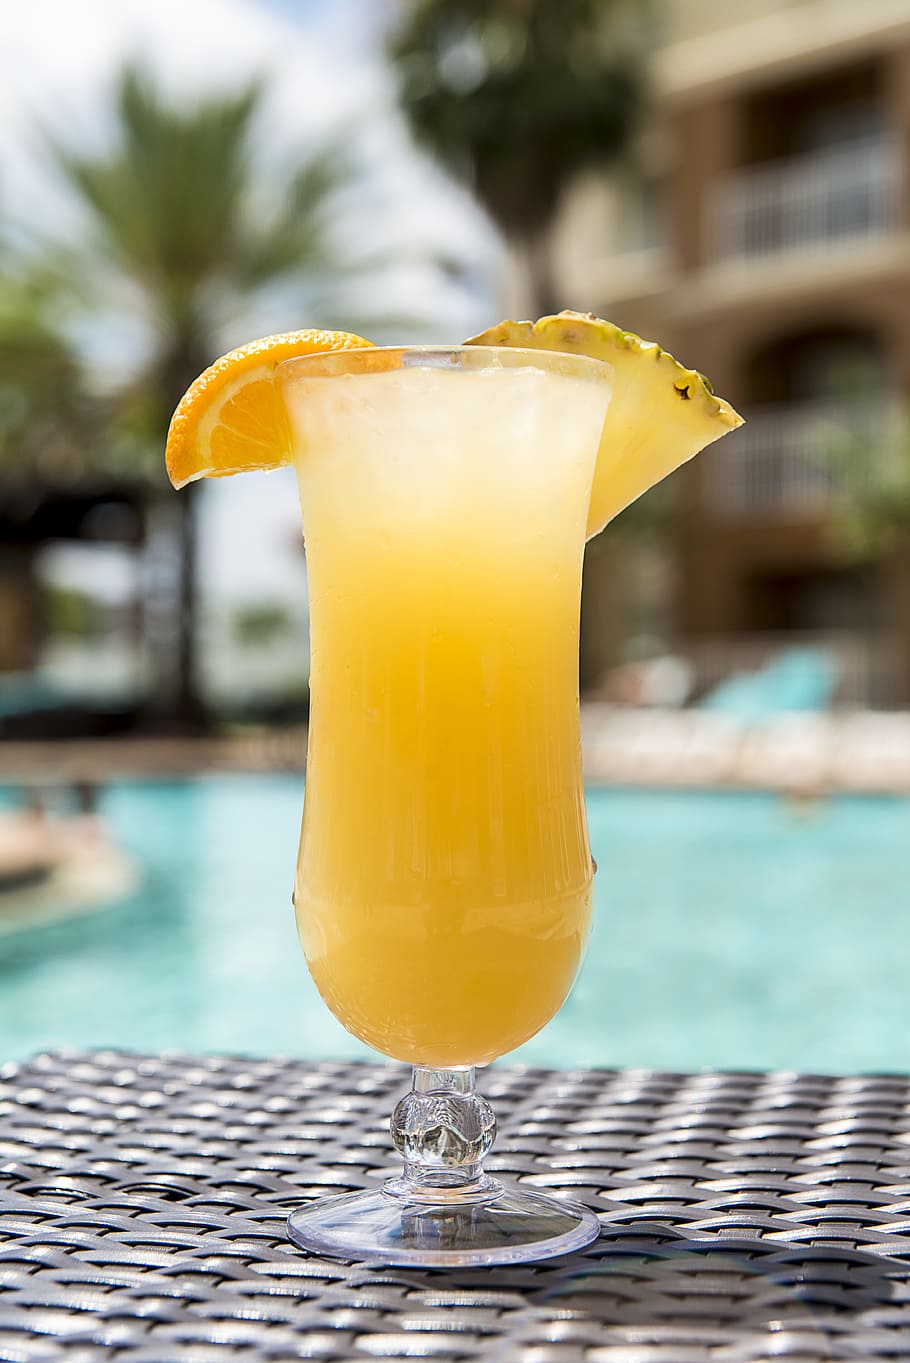 orange, pineapple juice, cocktail, drink, glass, summer, yellow, alcohol, bar, colorful